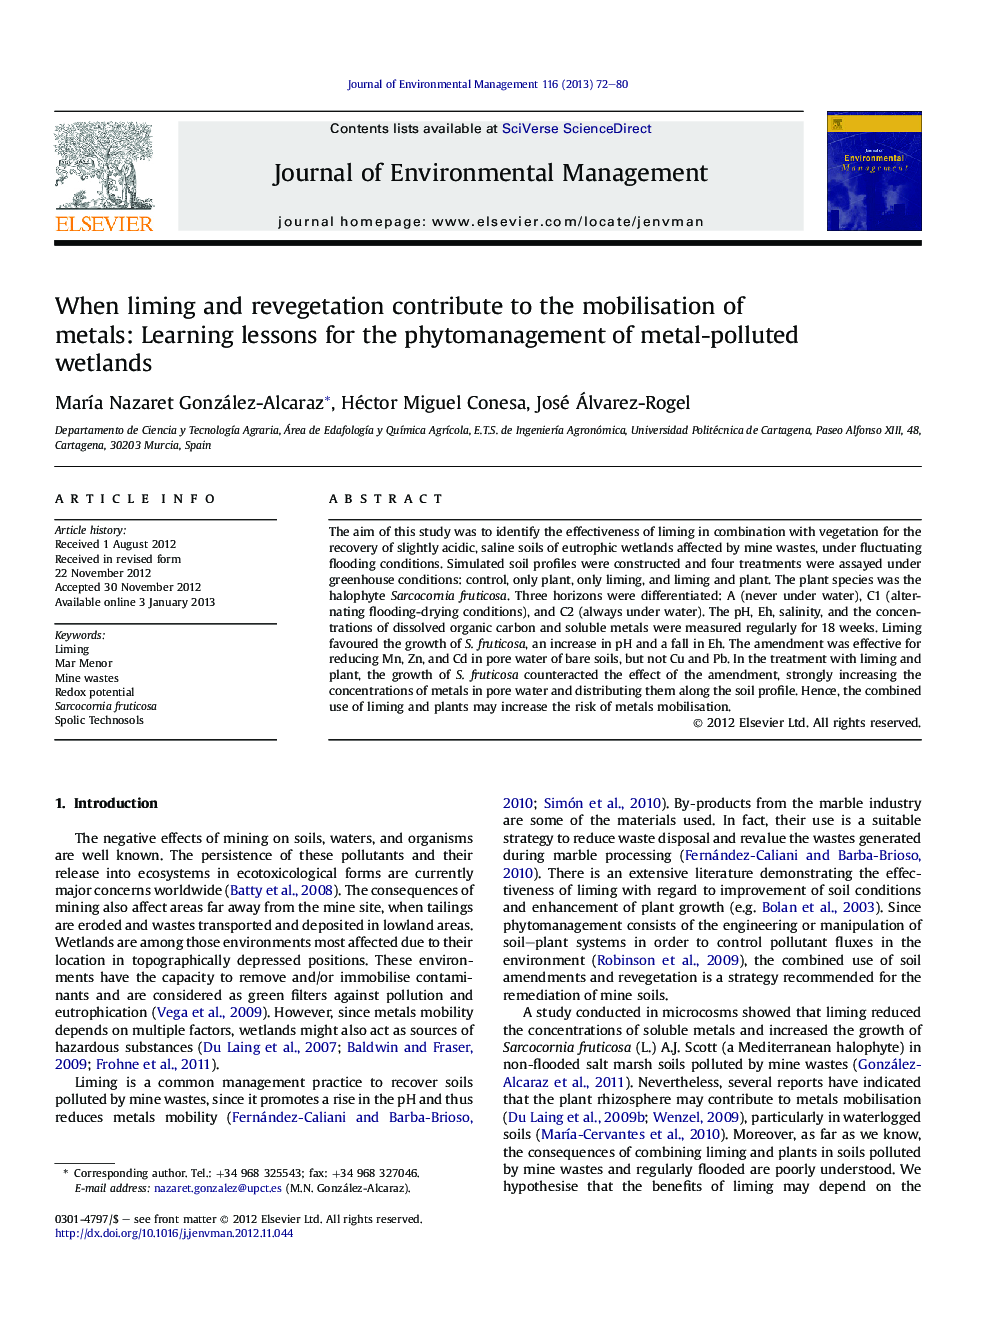 When liming and revegetation contribute to the mobilisation of metals: Learning lessons for the phytomanagement of metal-polluted wetlands